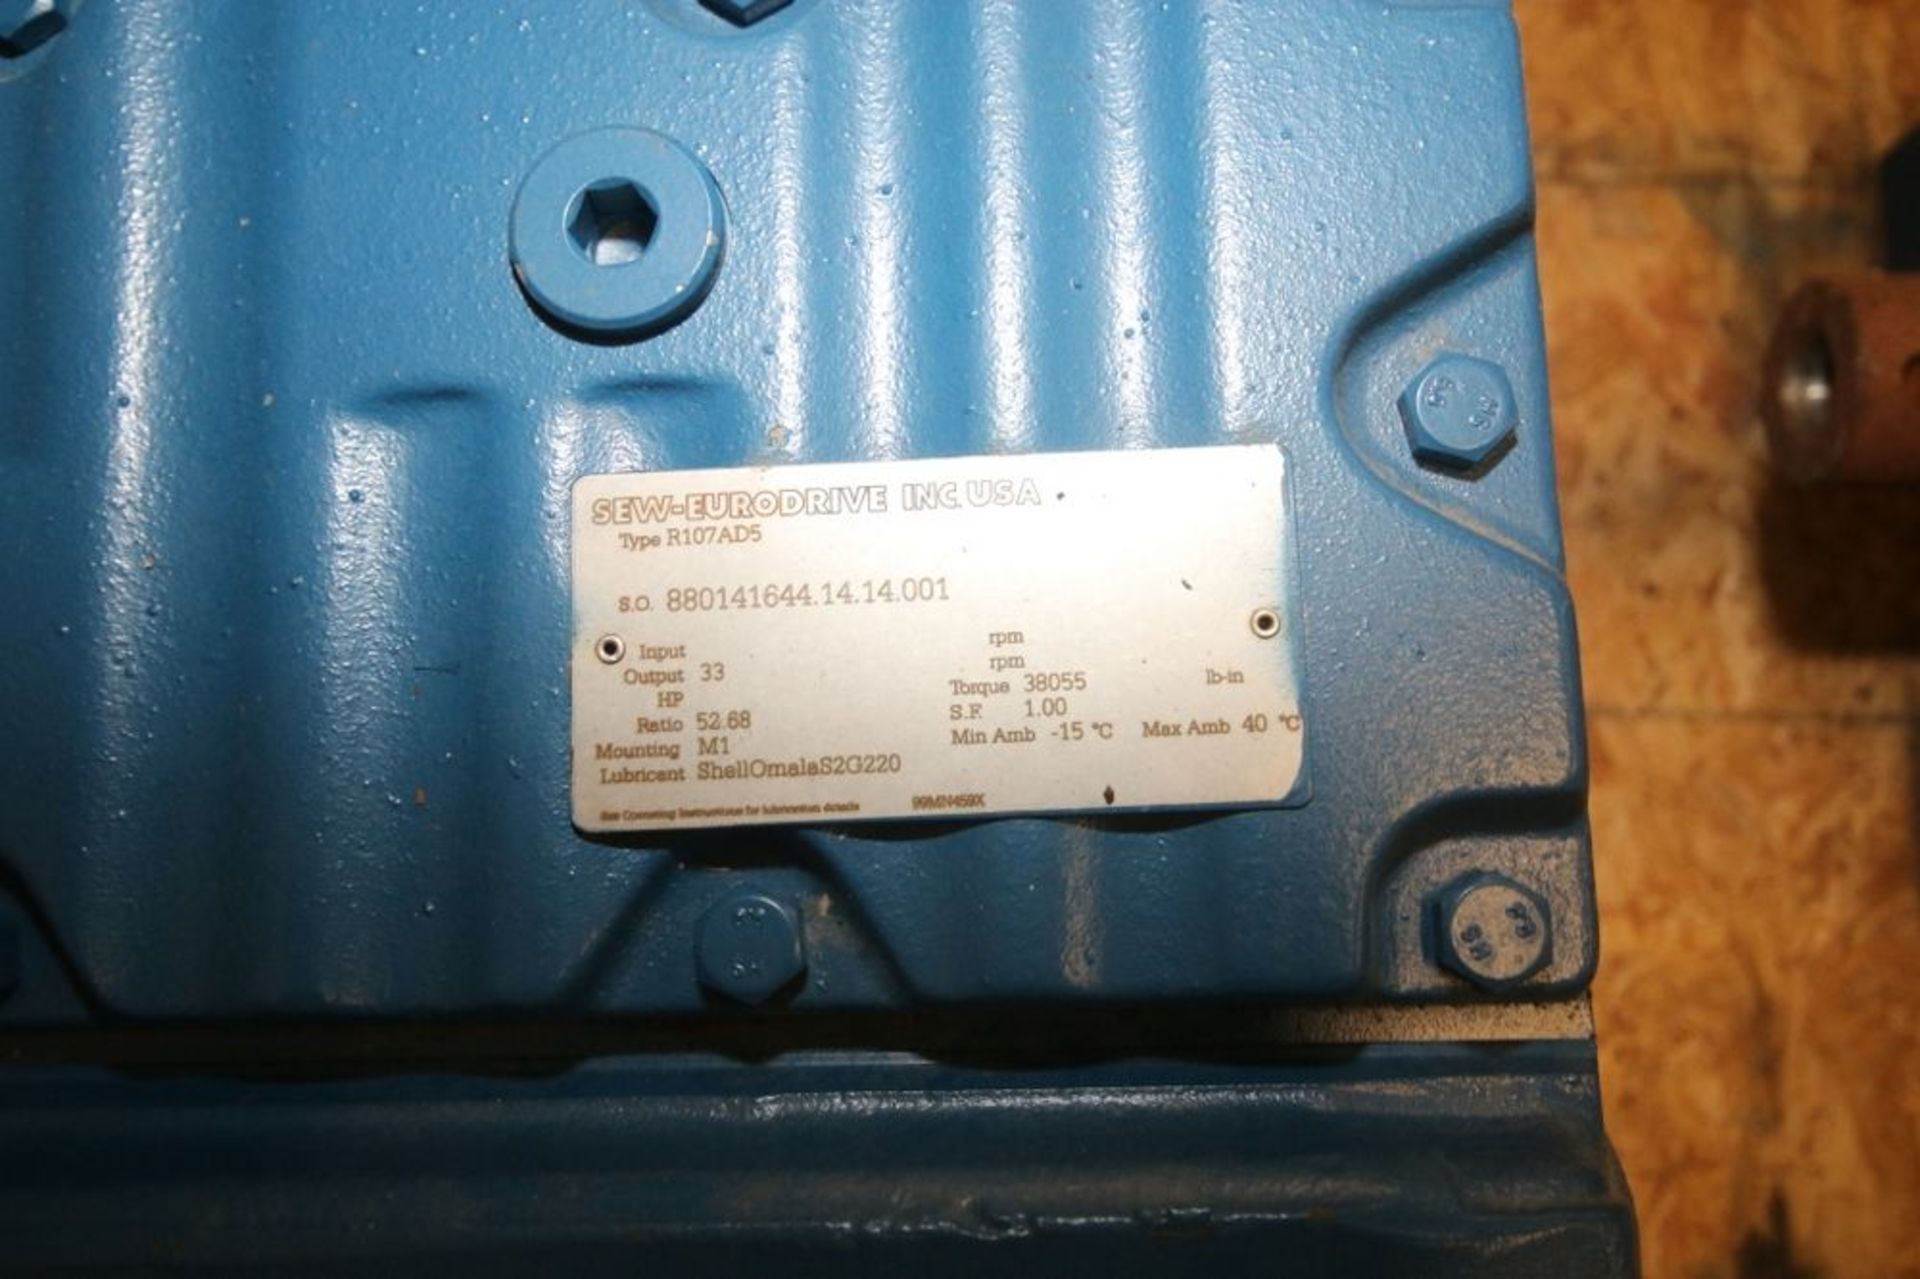 SEW Gear Drive, Type R107AD5, S/N 880141644.14.001, Ratio 52.68 (INV#66841)(LOCATED AT MDG AUCTION - Image 6 of 6